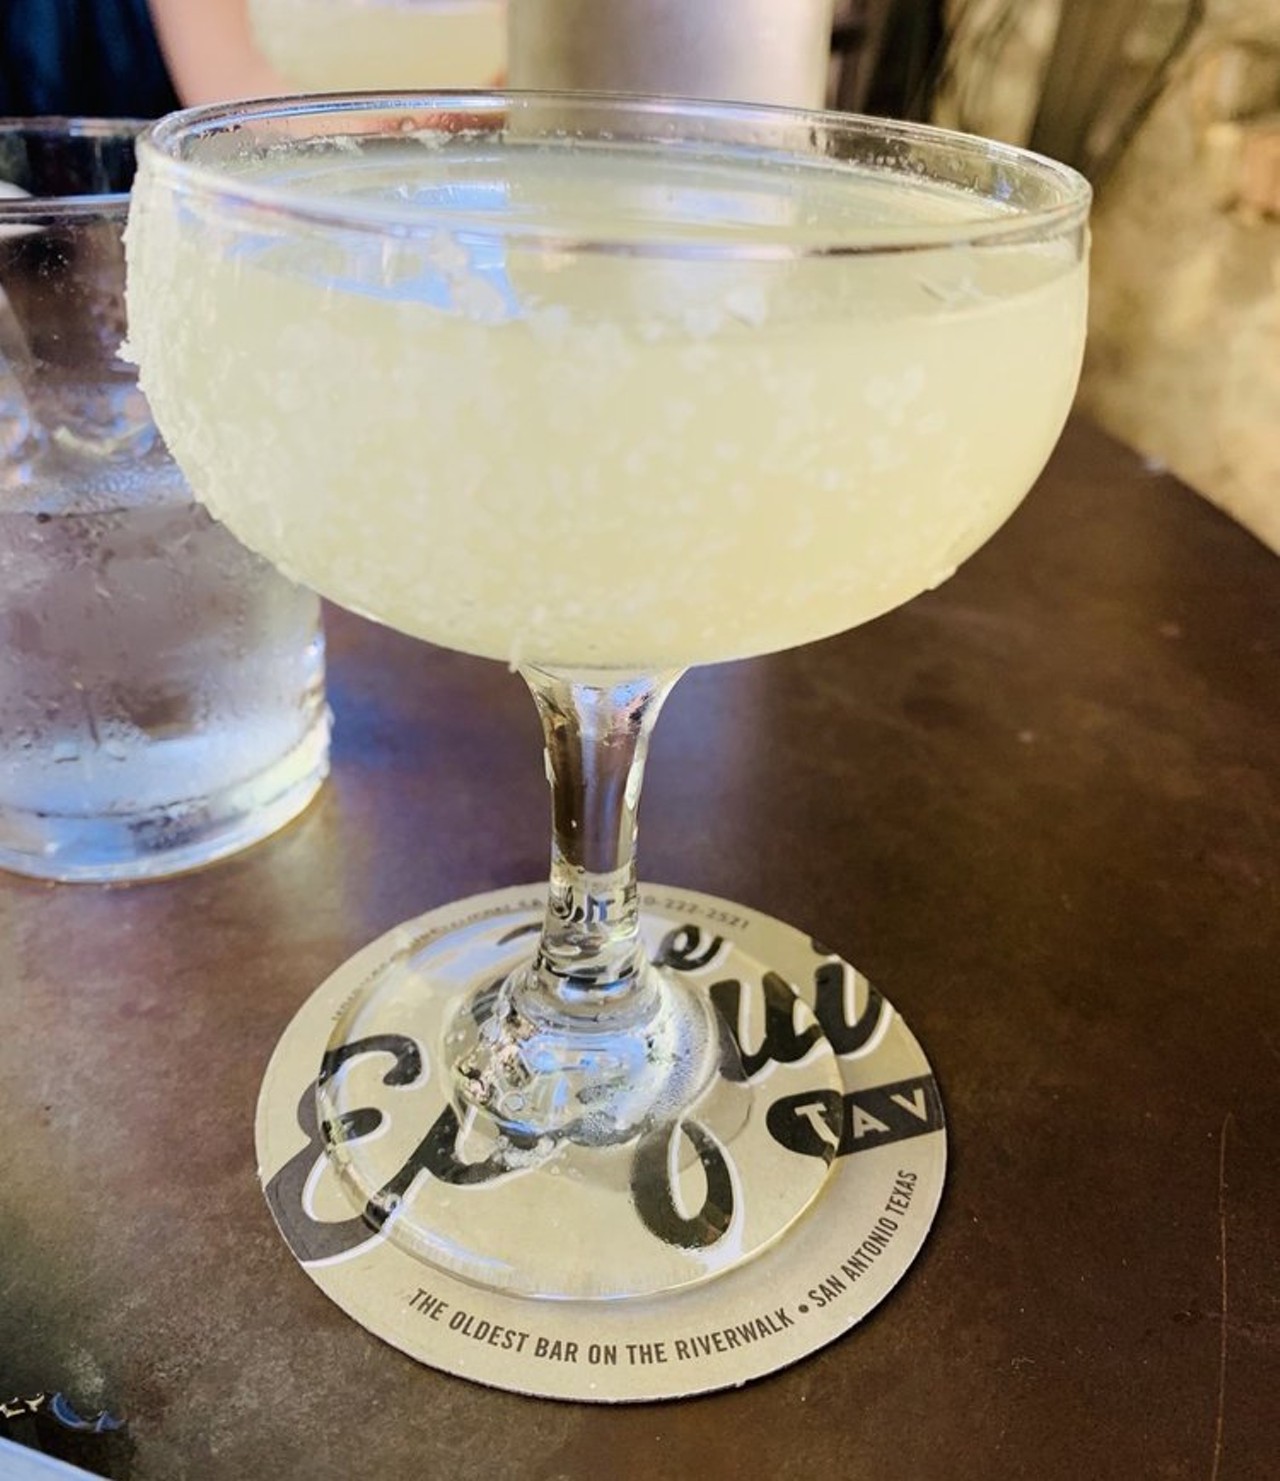 The Esquire Tavern
155 E Commerce St, (210) 222-2521, esquiretavern-sa.com
This downtown spot is known for its inspired drinks, and its take on the classic margarita is definitely noteworthy. The next time you find yourself at this drinking spot, consider ordering the Nuestra Margarita — made with blanco tequila, key line, French triple-sec and kosher salt — served up just how you like it.
Photo via Yelp / Konstantina P.